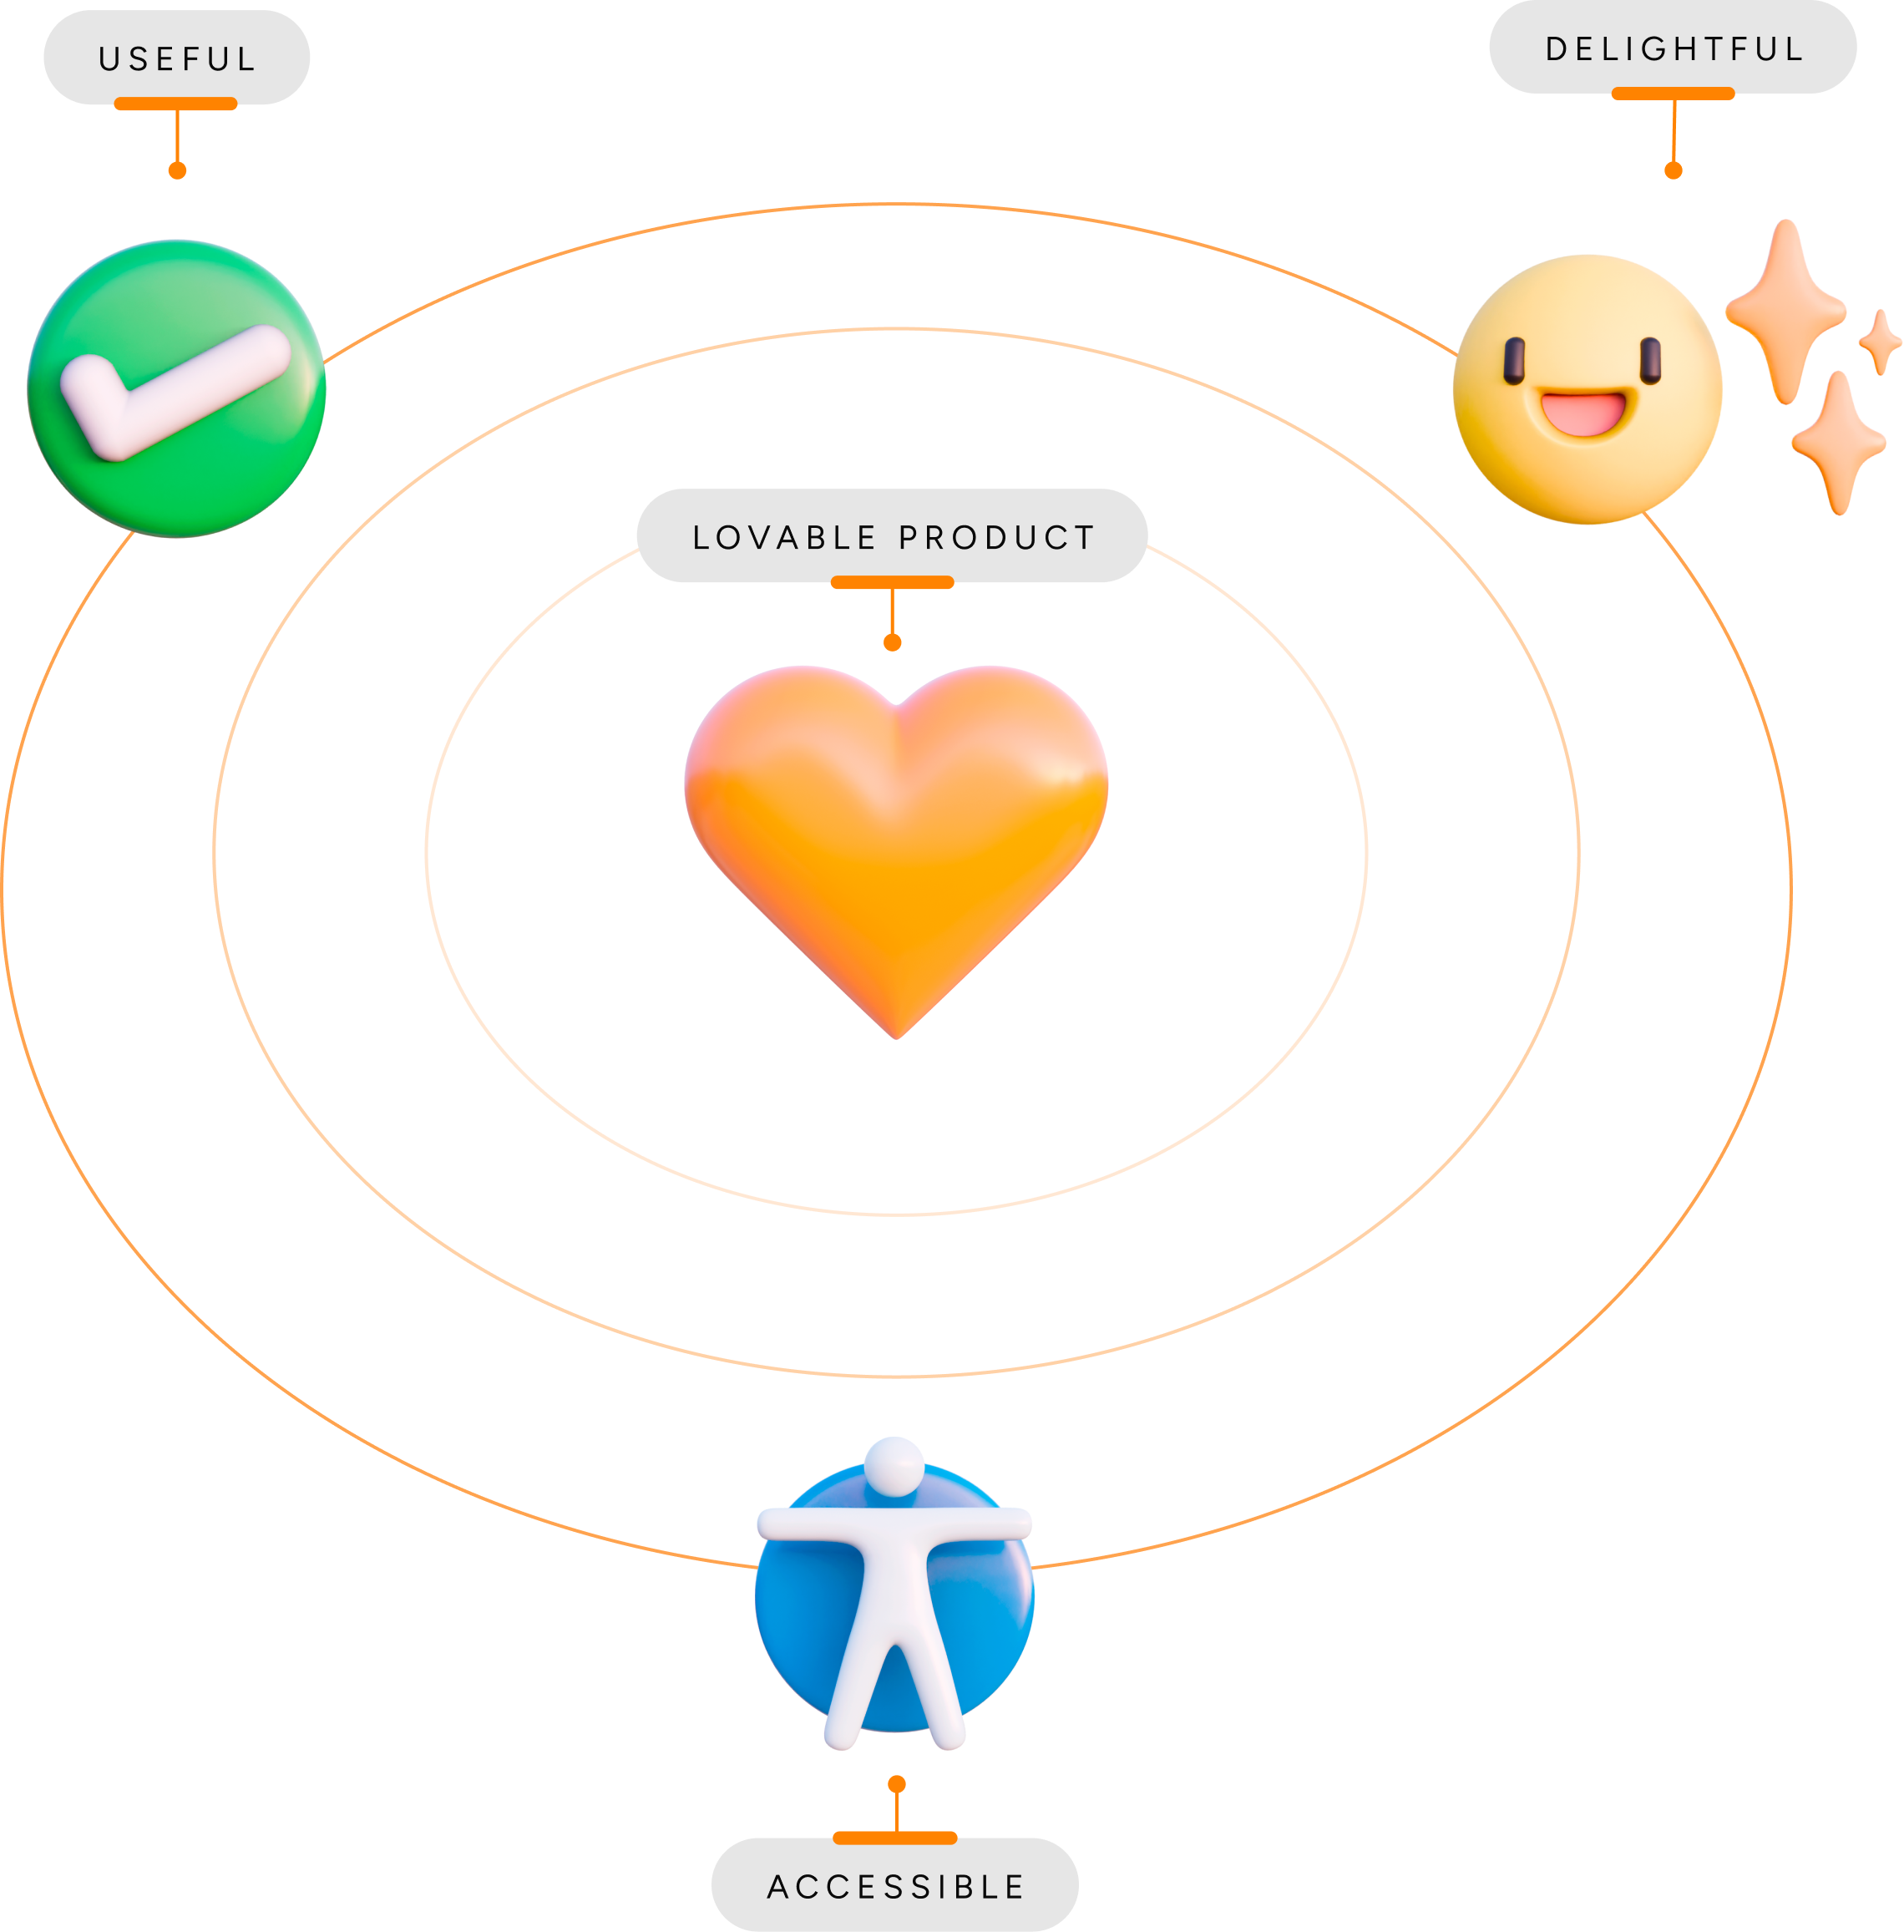 An abstract illustration showing a heart at the center, representing a lovable product. Surrounding elements labeled 'Useful,' 'Delightful,' and 'Accessible' highlight components of a positive user experience for ArcTouch's lovable product.